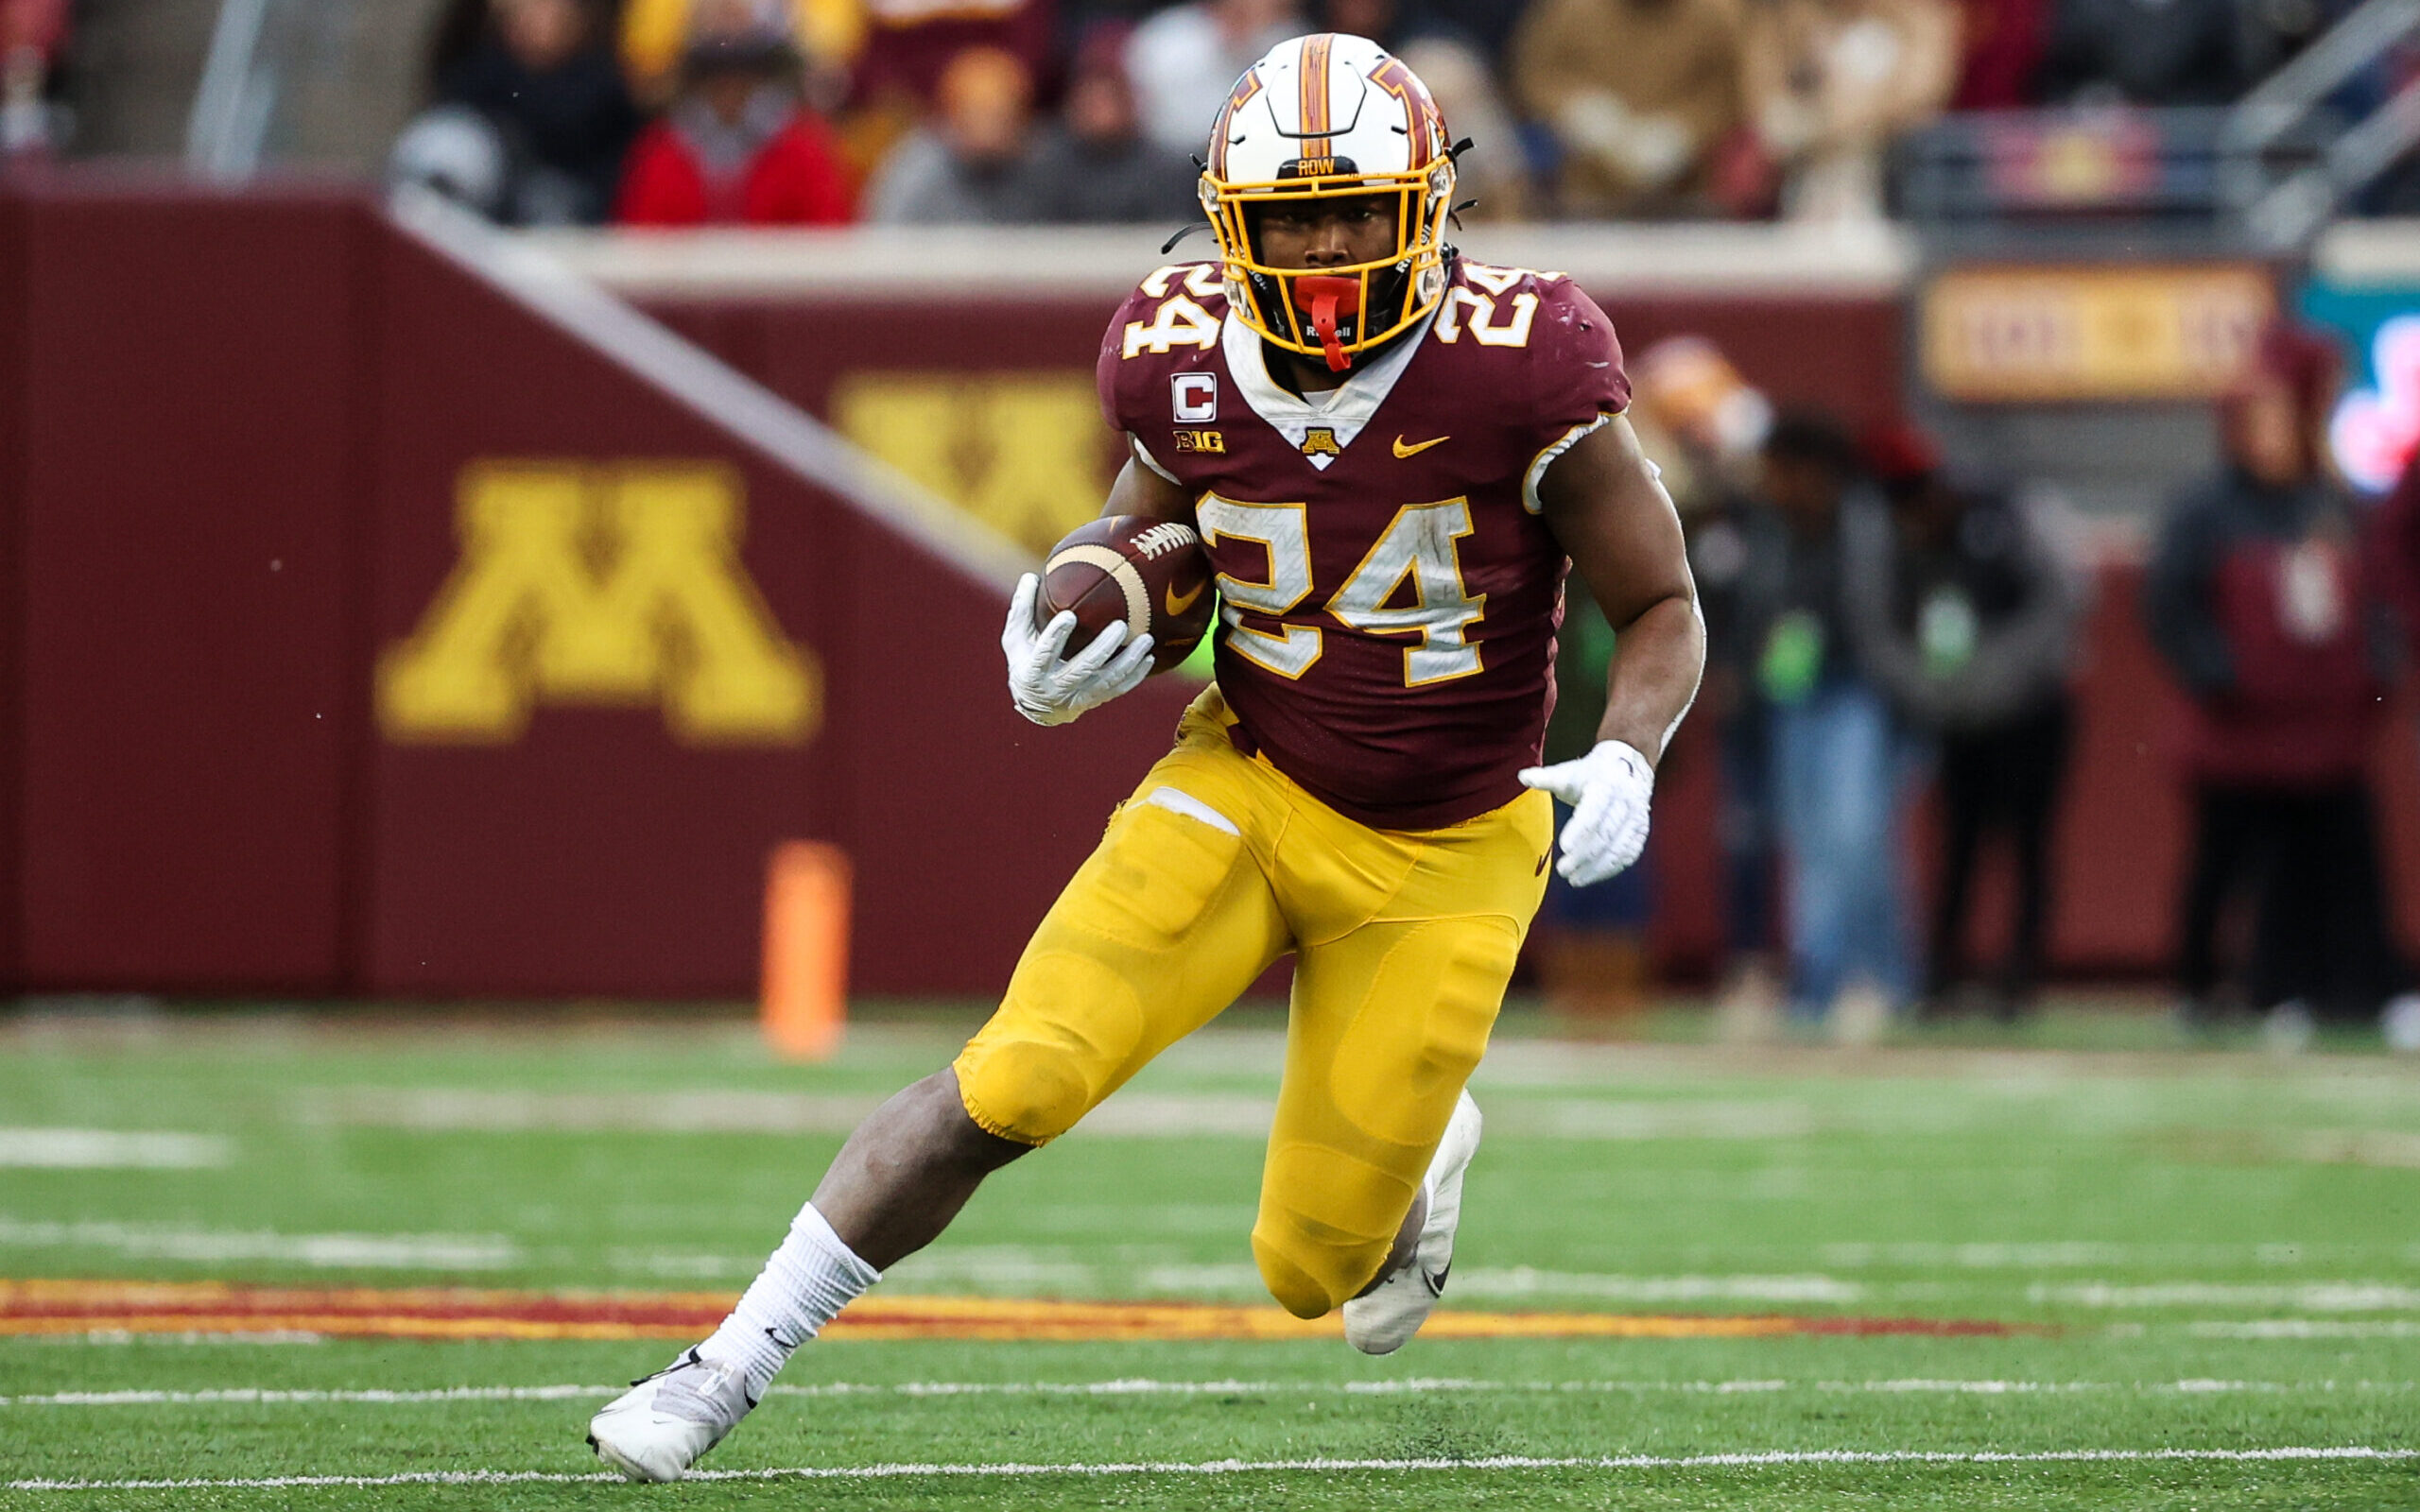 NFL RB Prospect Profiles: 4 Runners With Potential Projected For Day 3